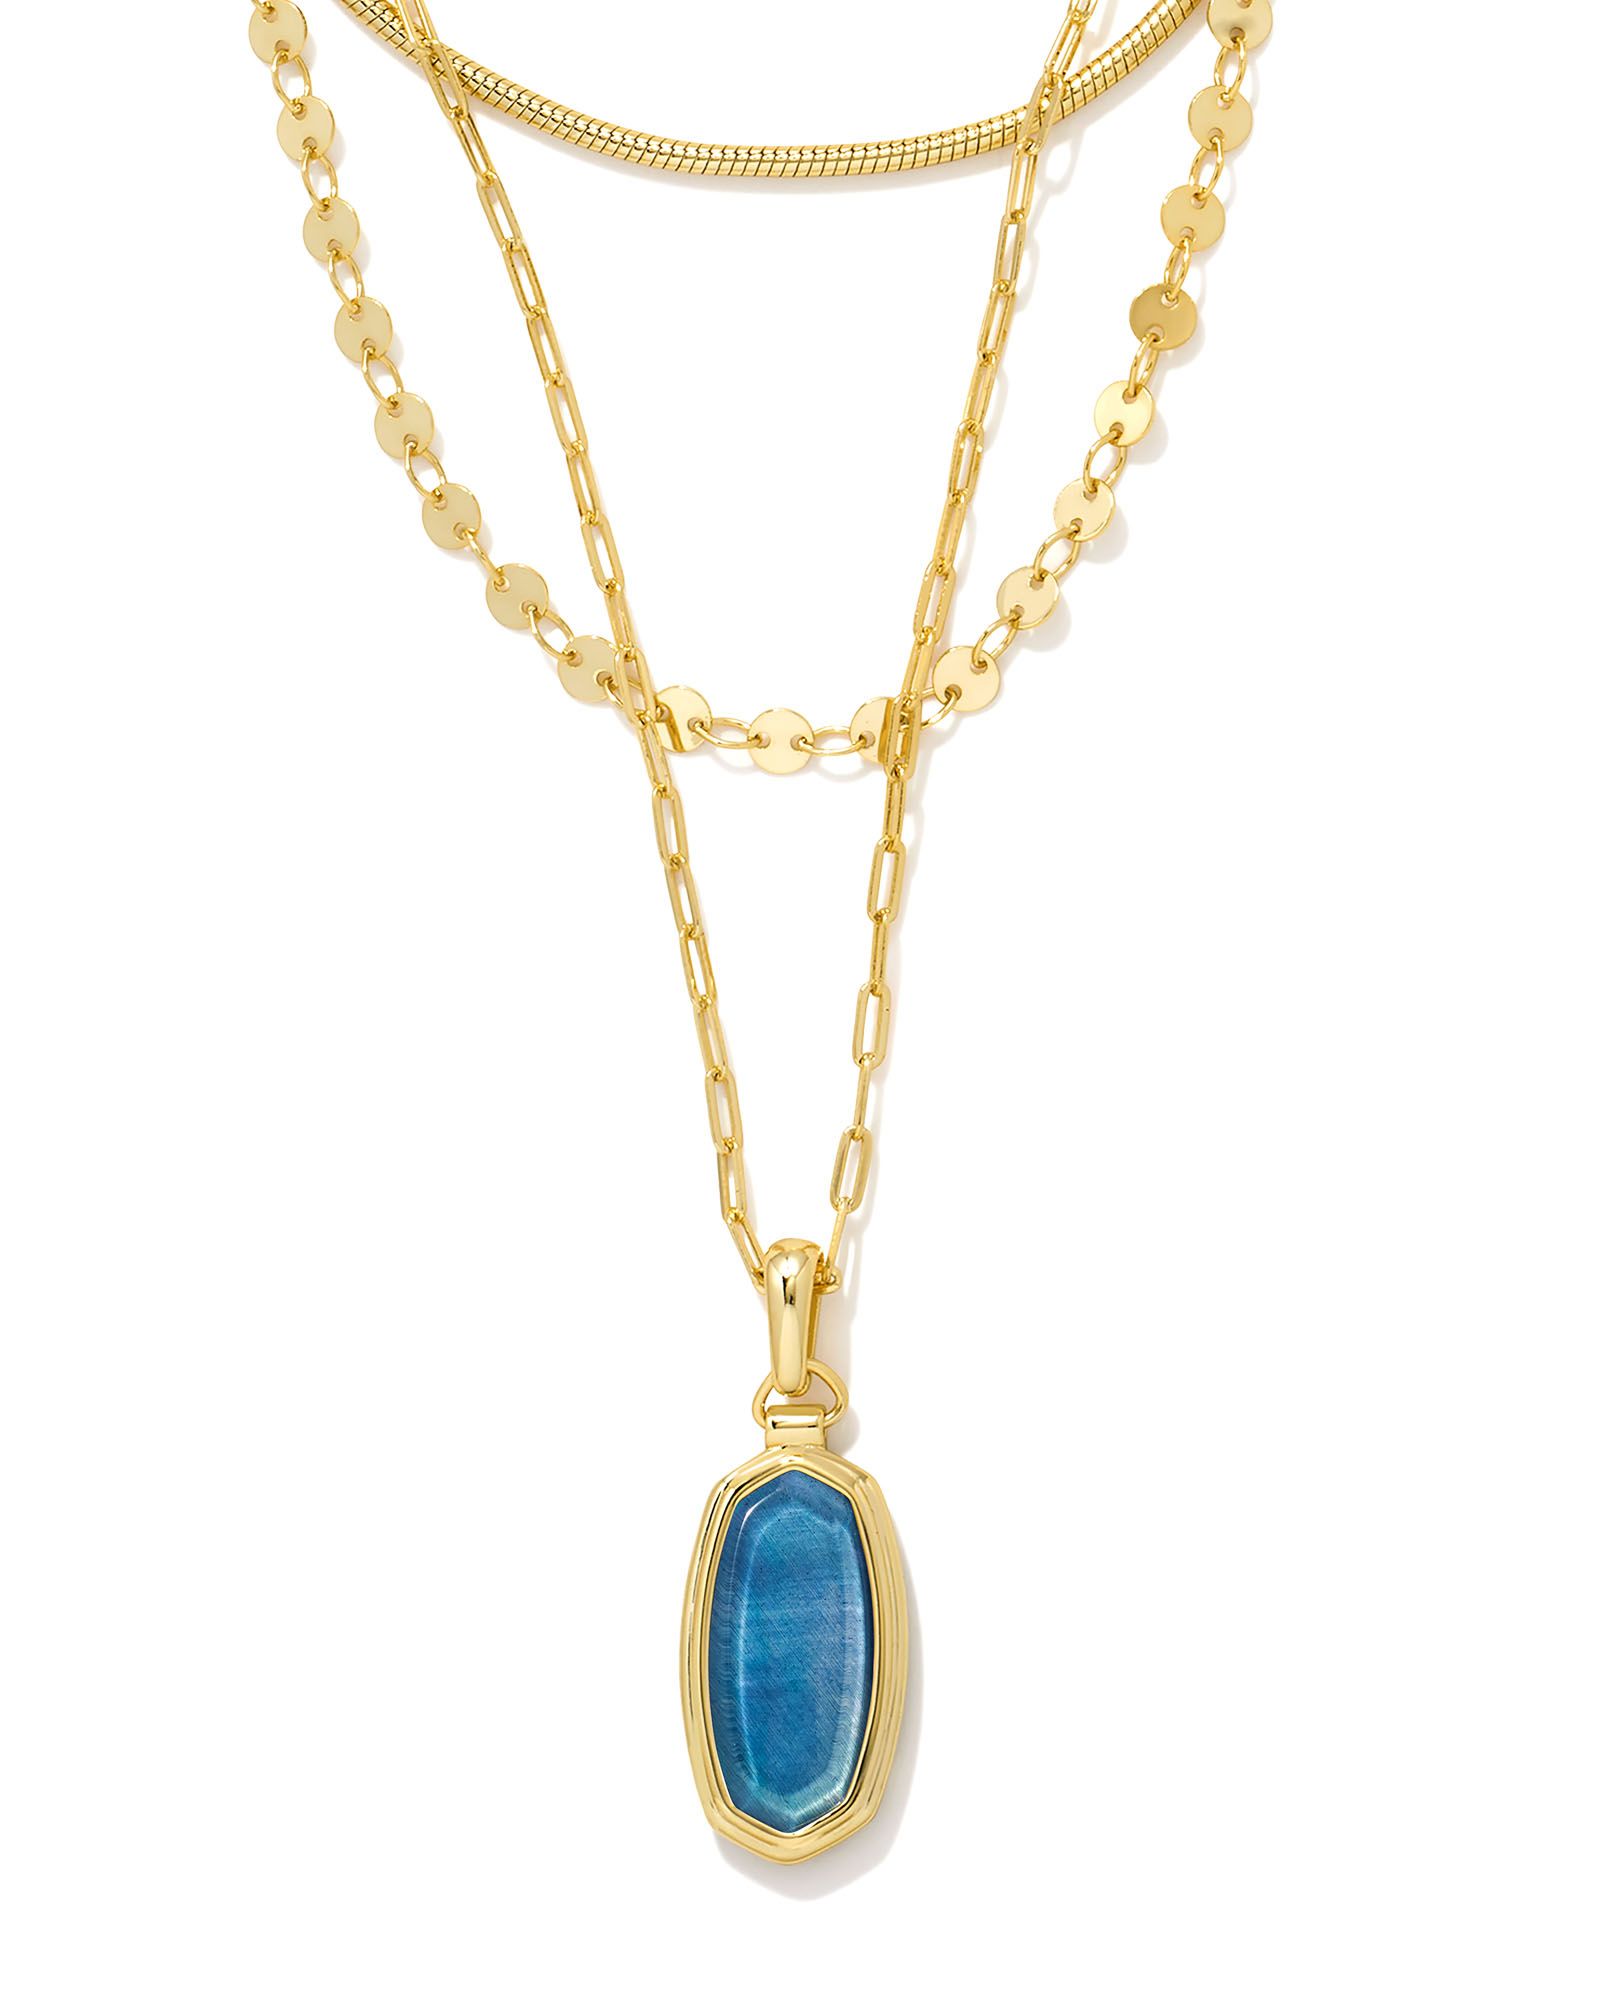 Framed Dani Convertible Gold Triple Strand Necklace in Dark Blue Mother-of-Pearl | Kendra Scott